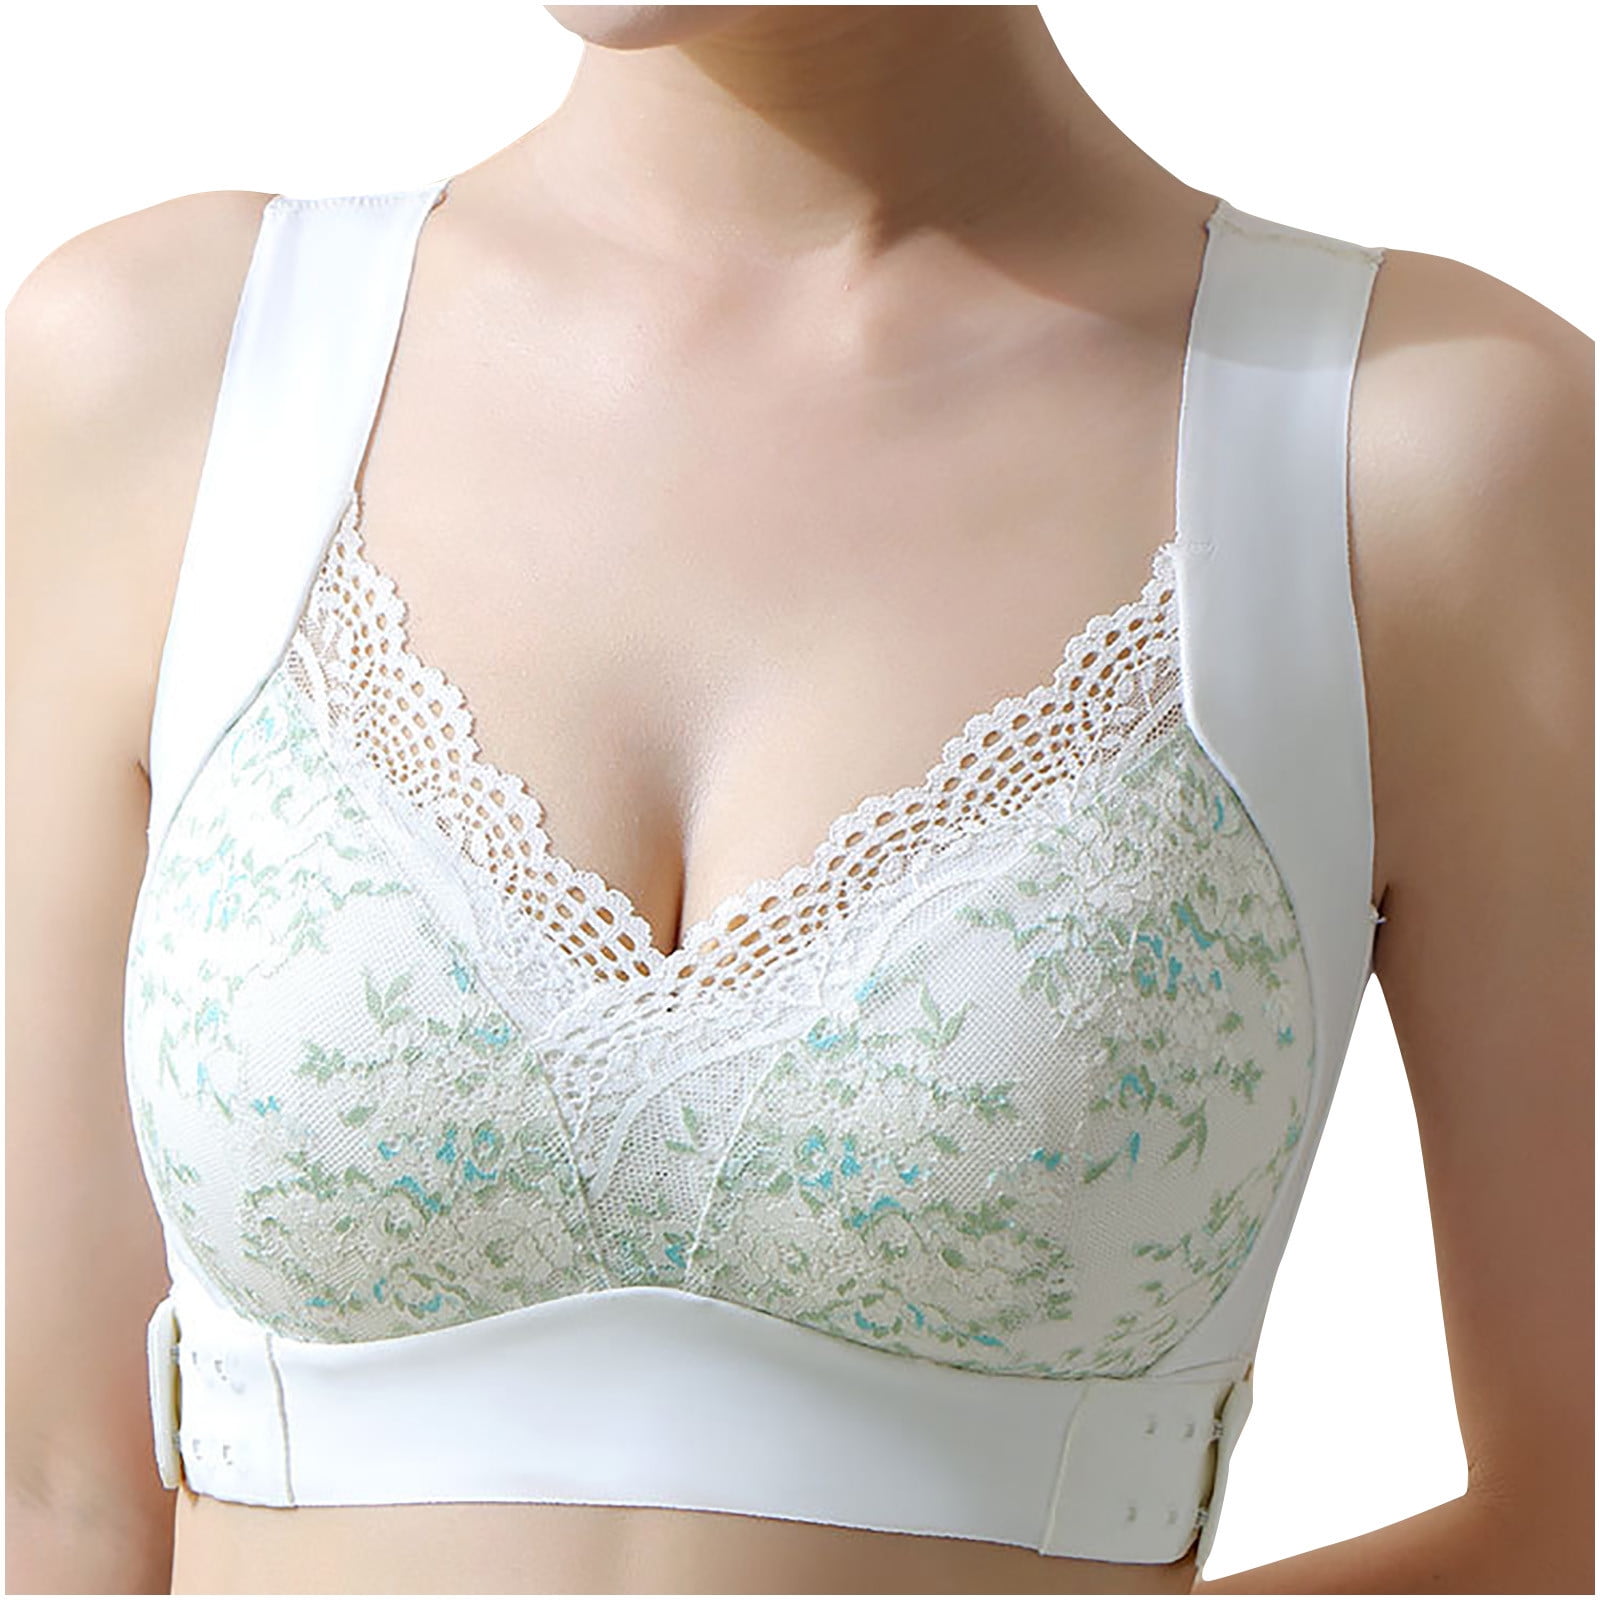 Hfyihgf On Clearance Front Closure Wirefree Everyday Bras for